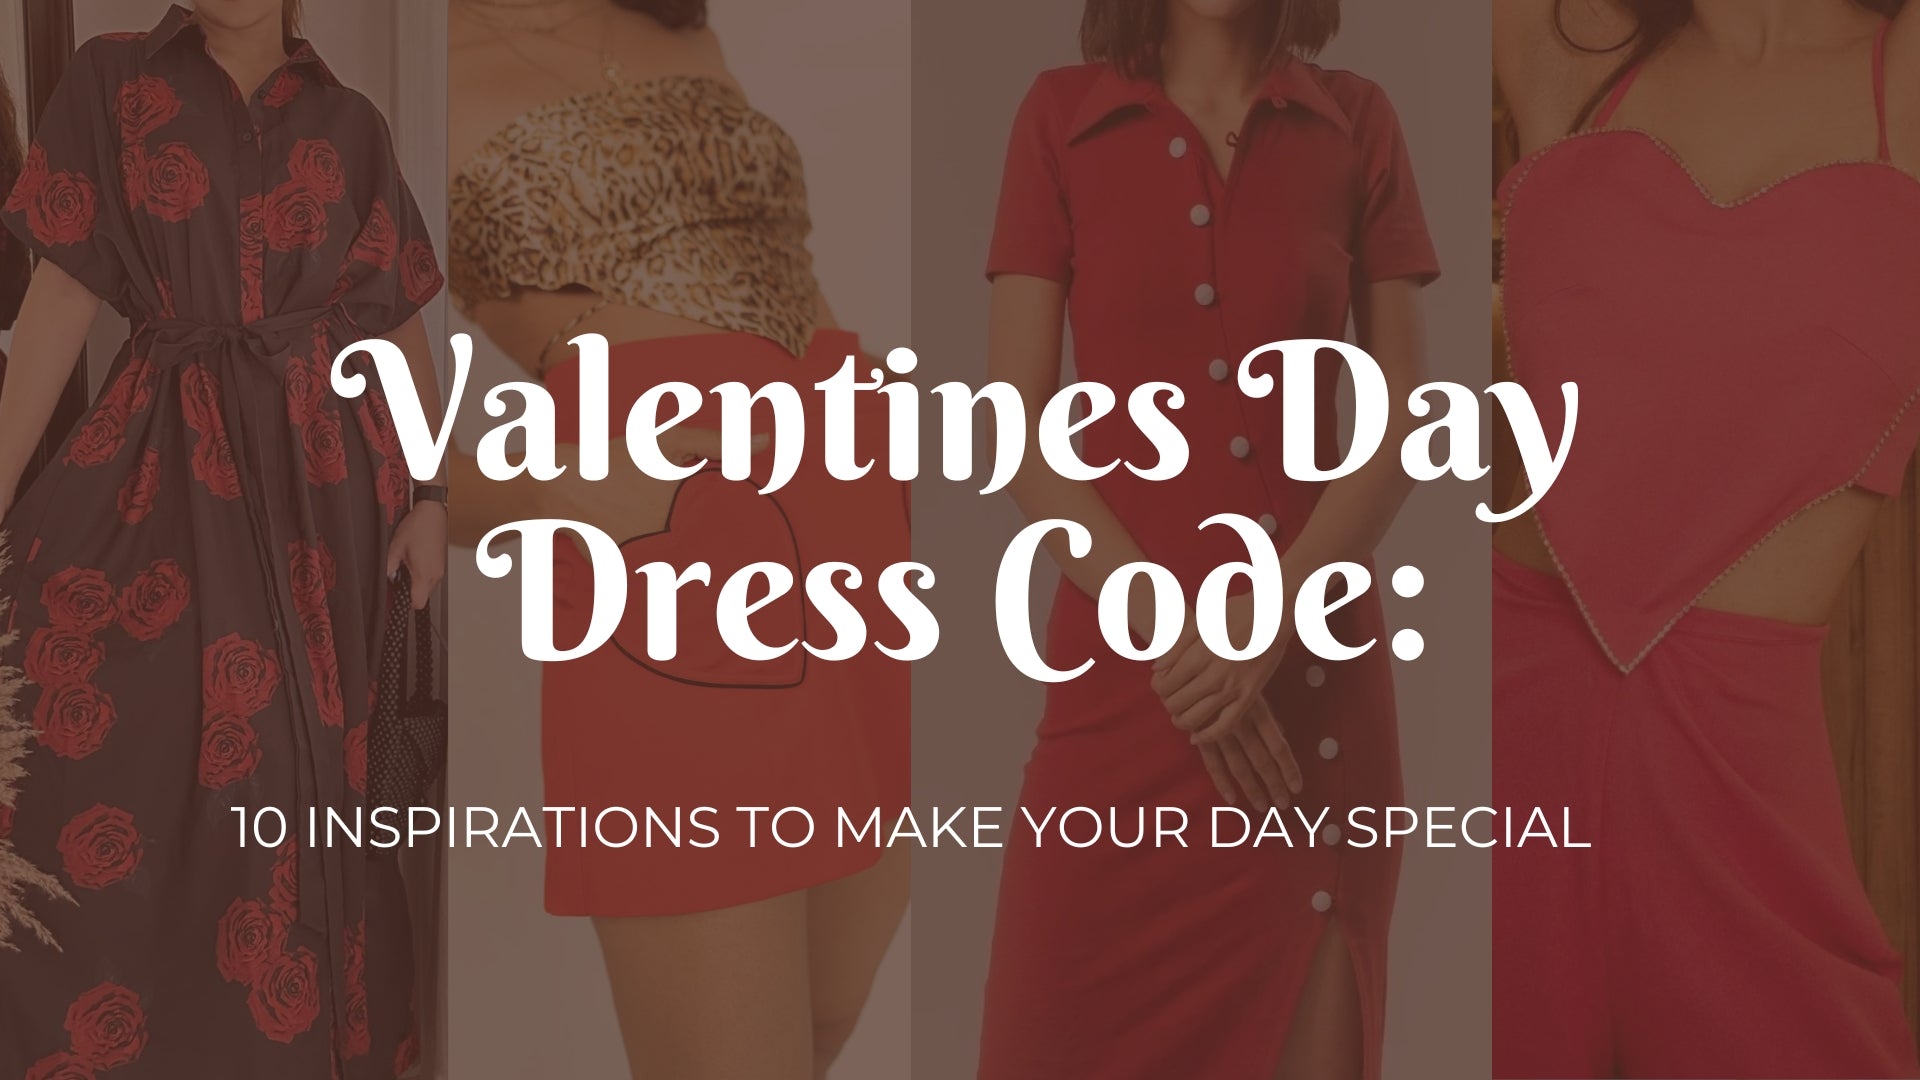 Valentines Day Dress Code: 10 Inspirations to Make Your Day Special 